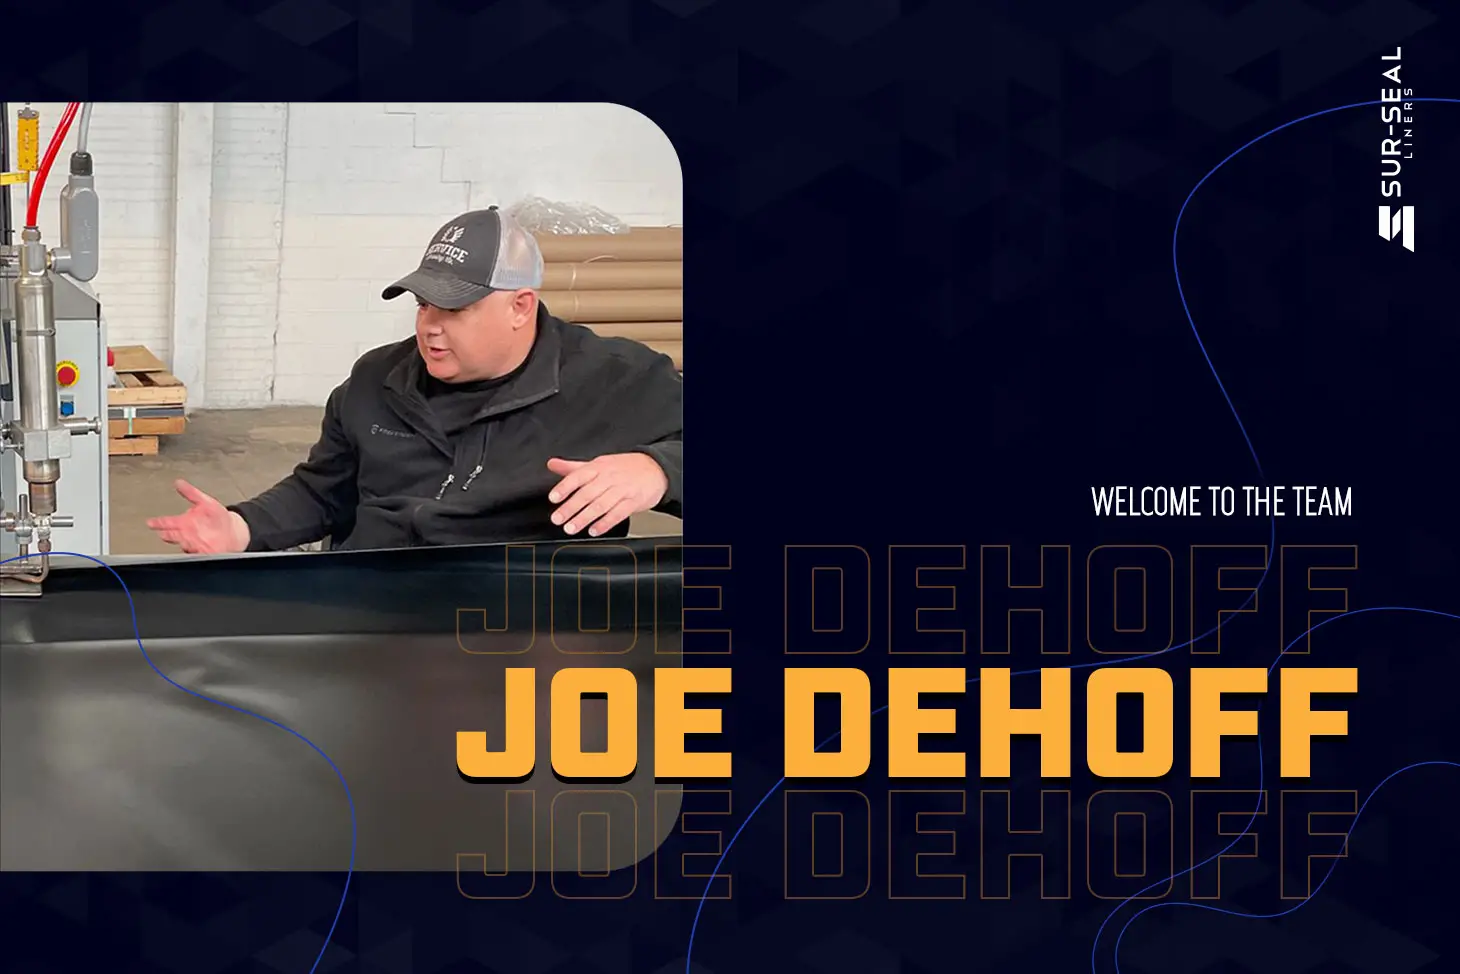 Joe Dehoff Join's the Team! featured image